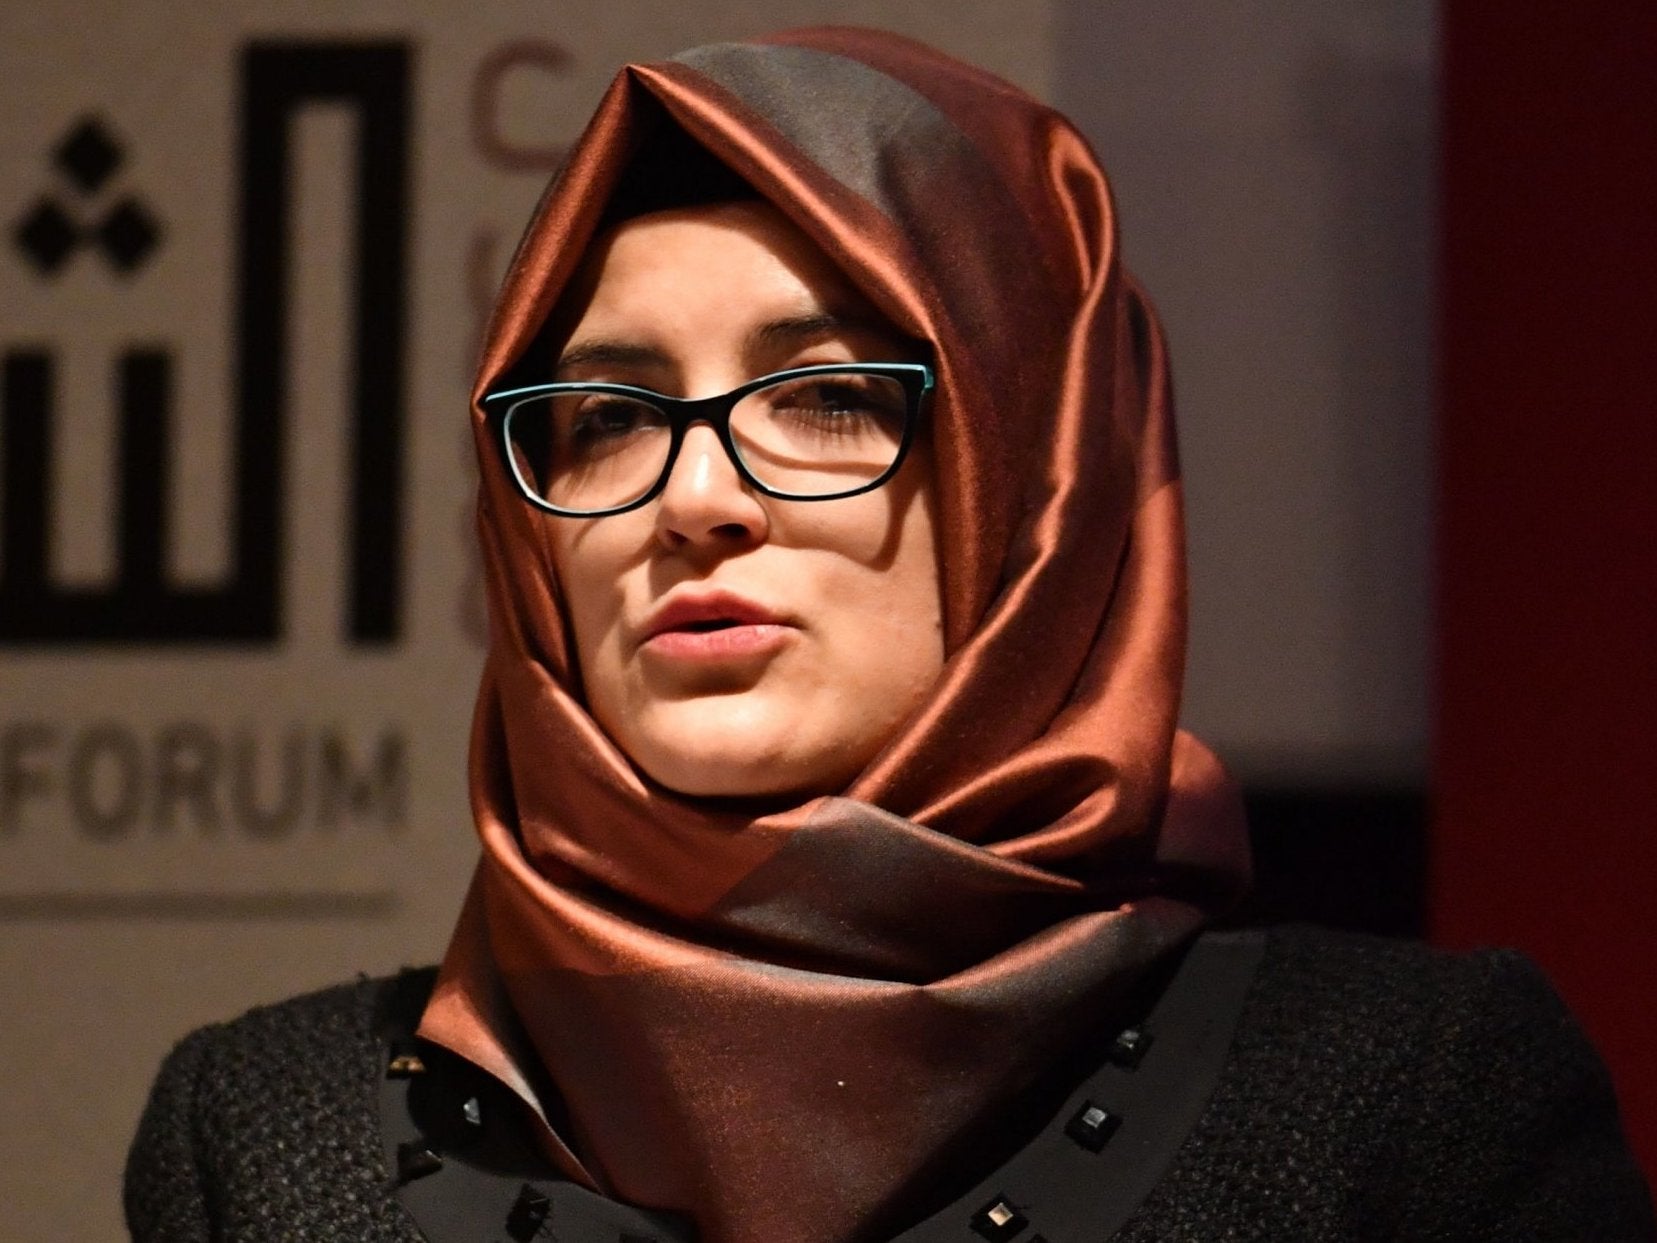 Hatice Cengiz, the fiancee of the murdered journalist Jamal Khashoggi speaks during a memorial event for her fiance at the Insitution of Mechanical Engineers in London